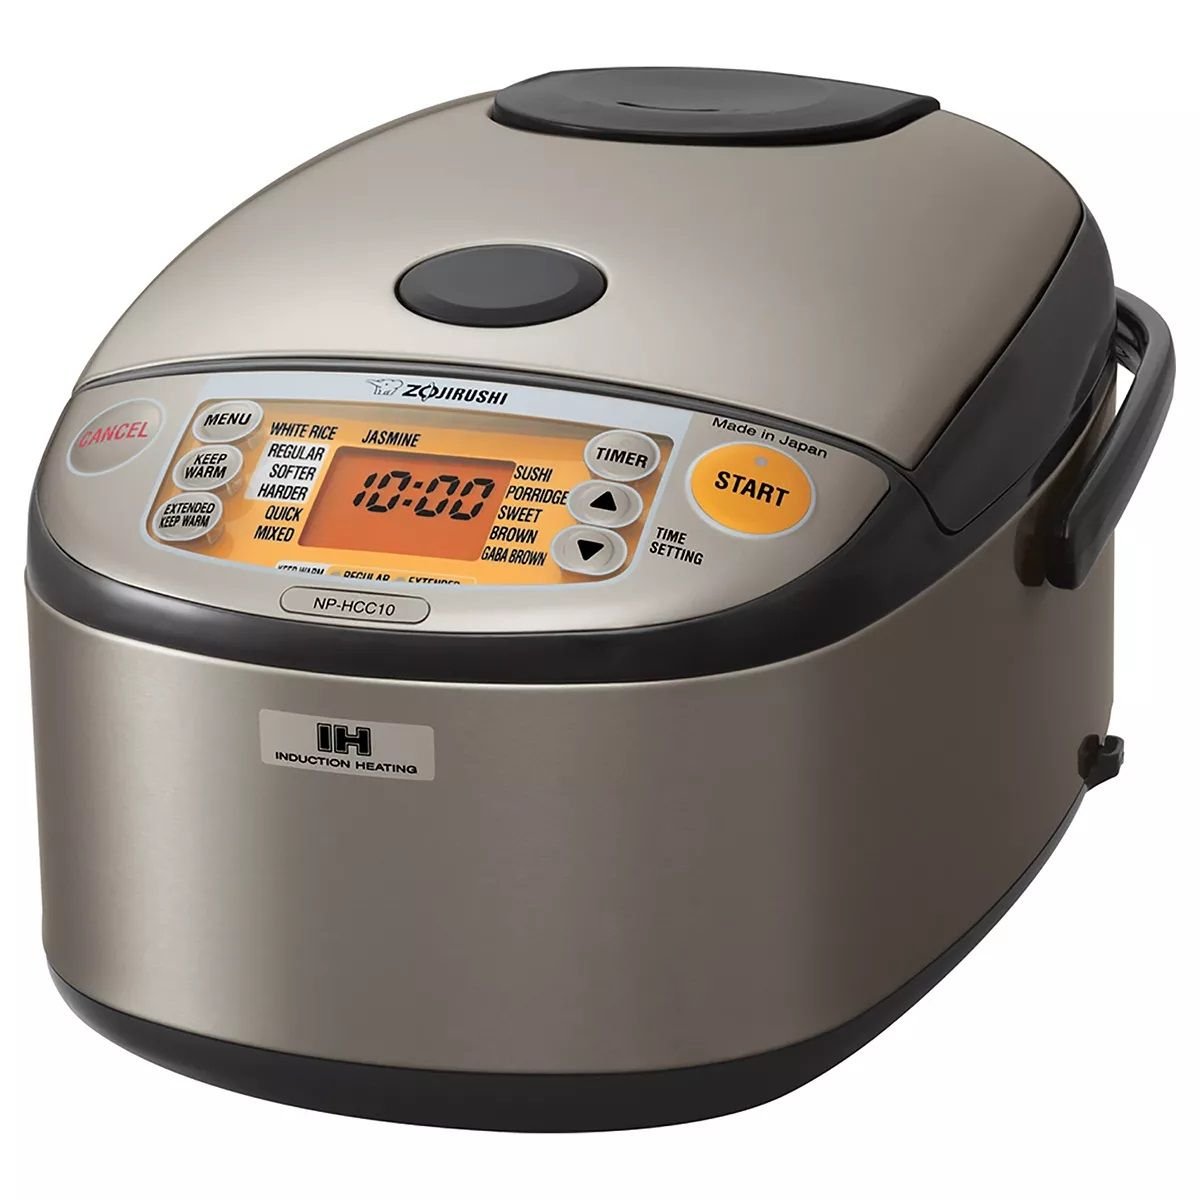 Commercial 60 Cup/ 14 L Rice Cooker/Warmer